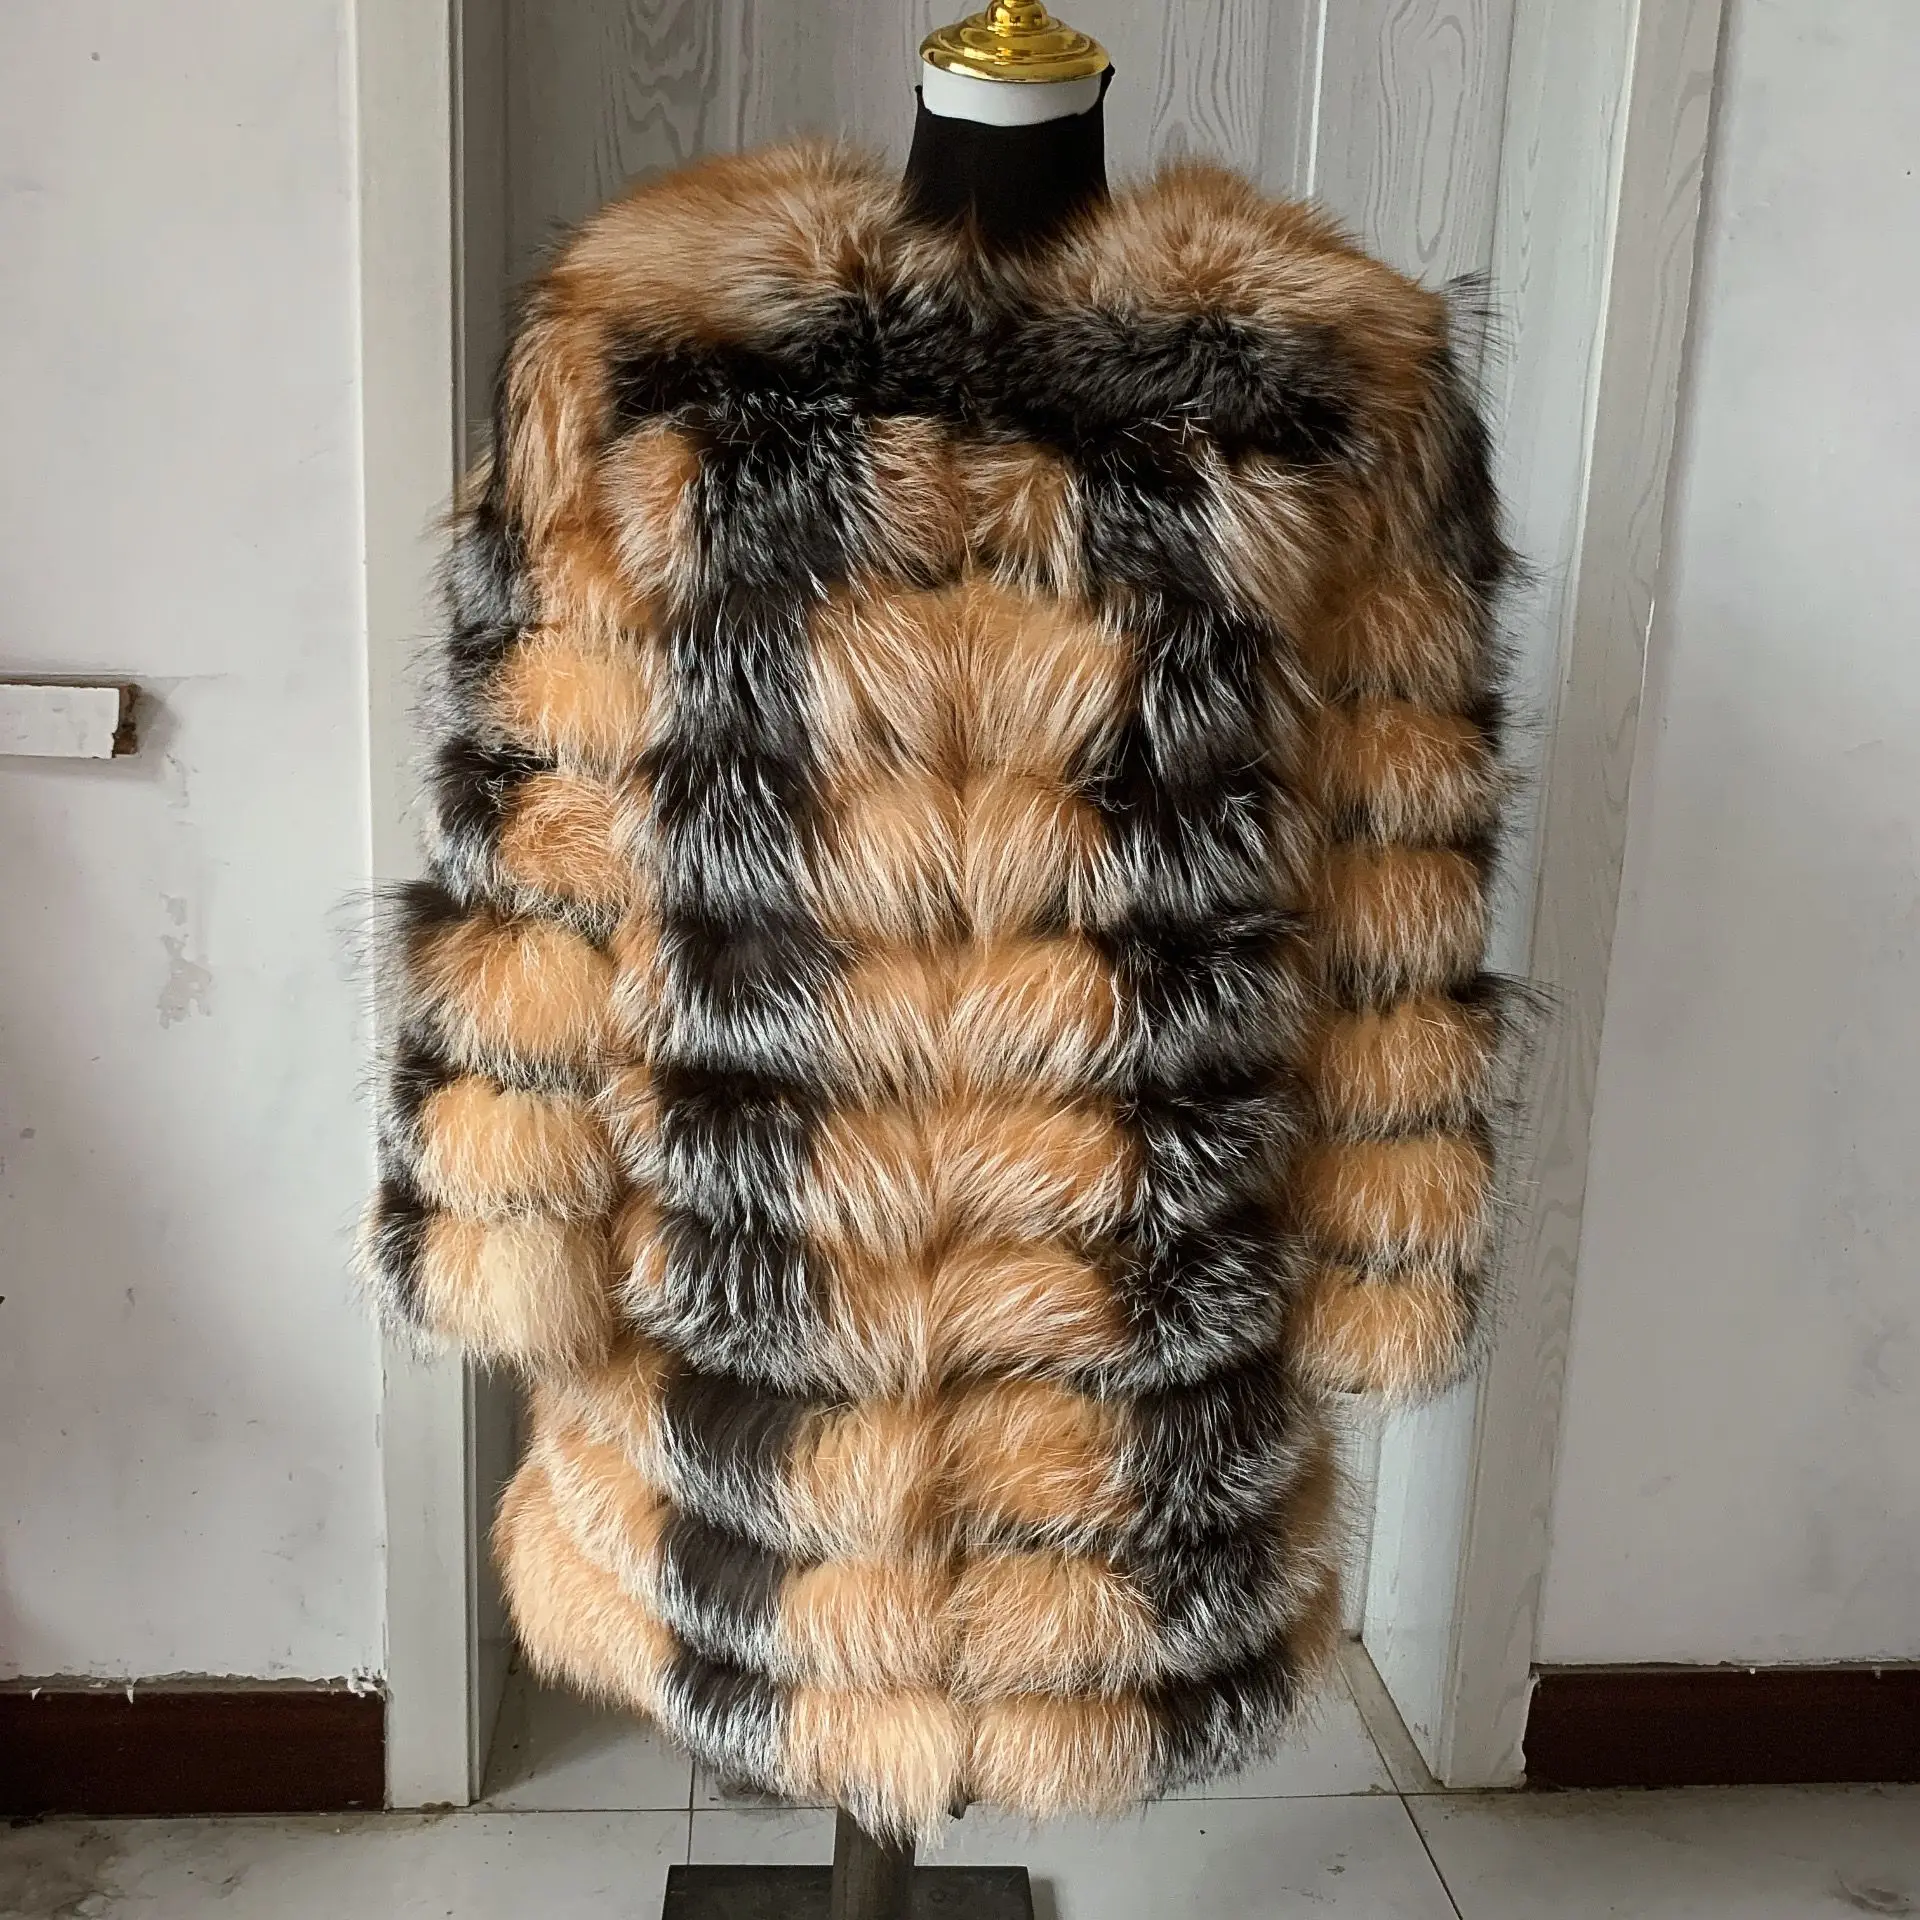 Women's winter warm real fur long coat noble quality golden fox coat natural real fox fur long luxury leather jacket enlarge